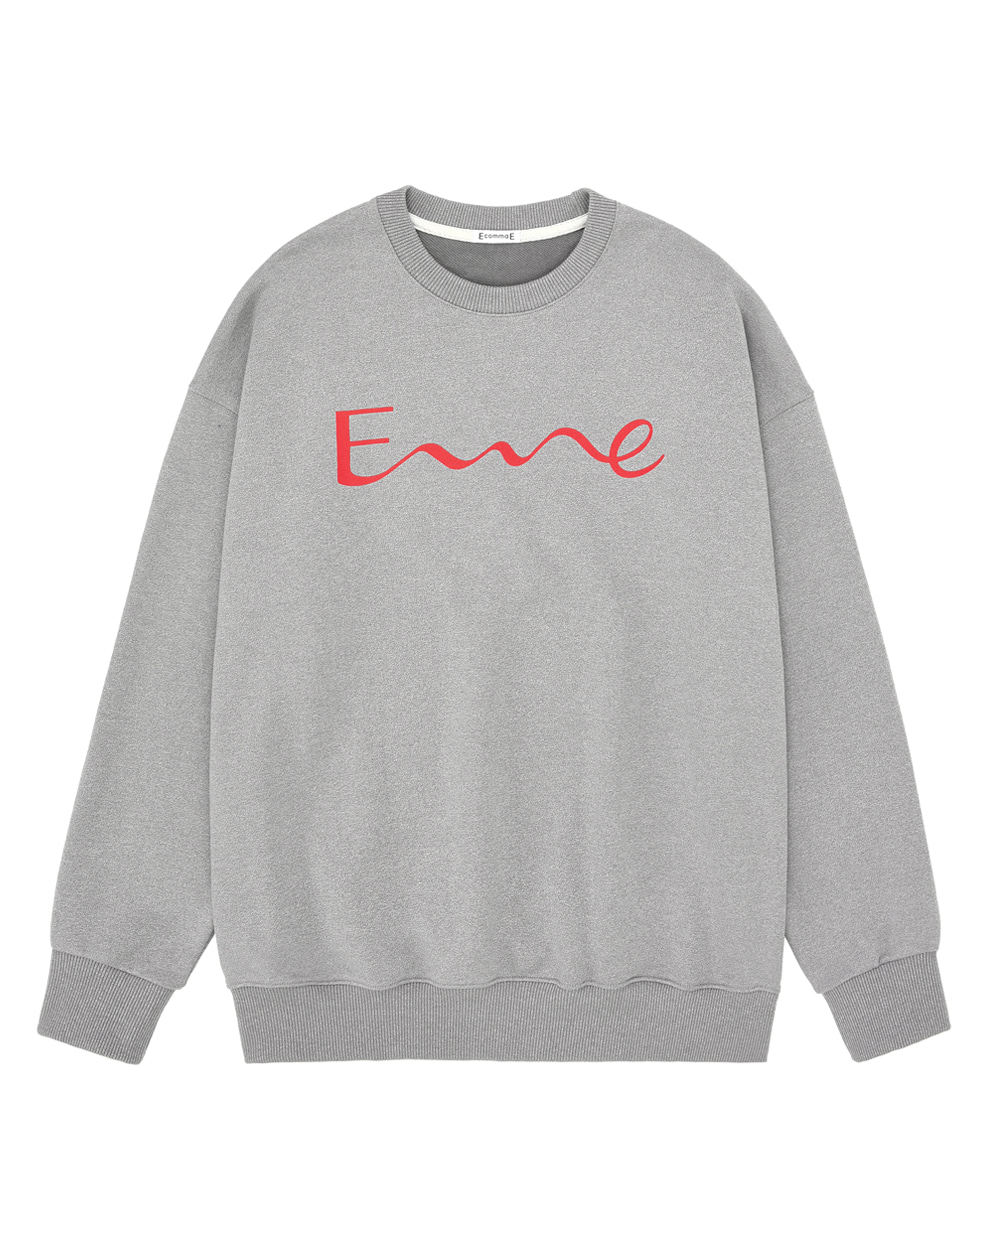 SIGNATURE OVER SIZED SWEAT-SHIRT (GRAY) (3colors)